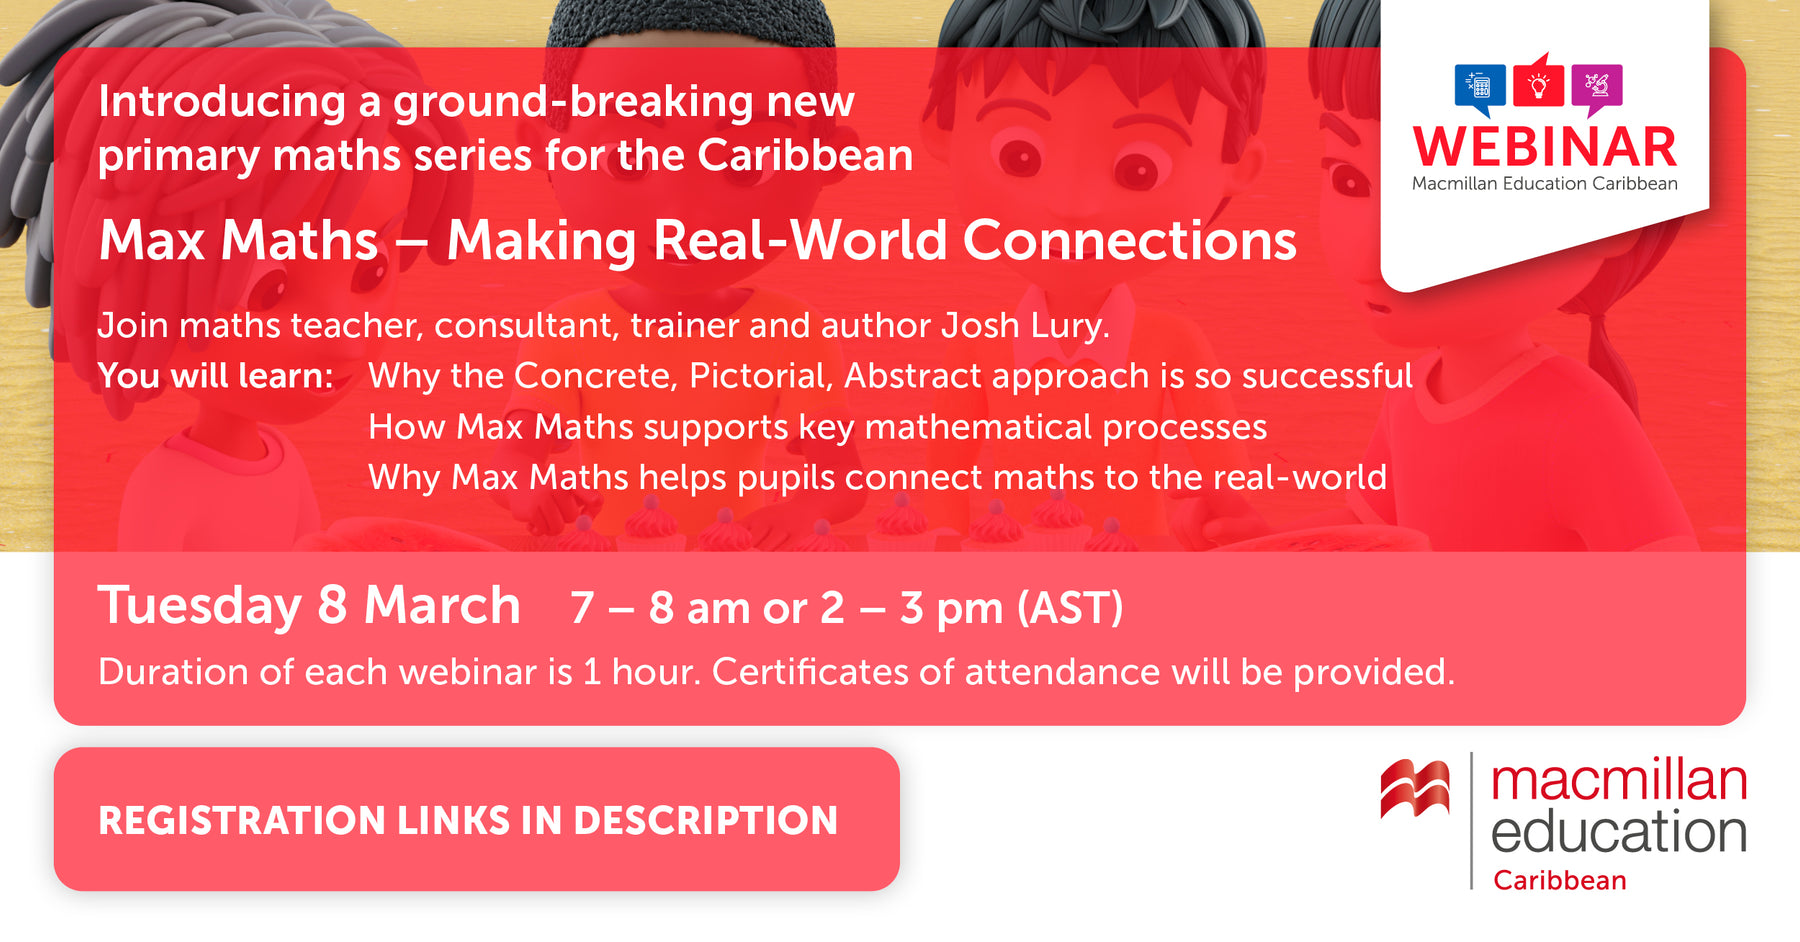 Join author Josh Lury for the first Max Maths - Making Real-World Connections webinar!